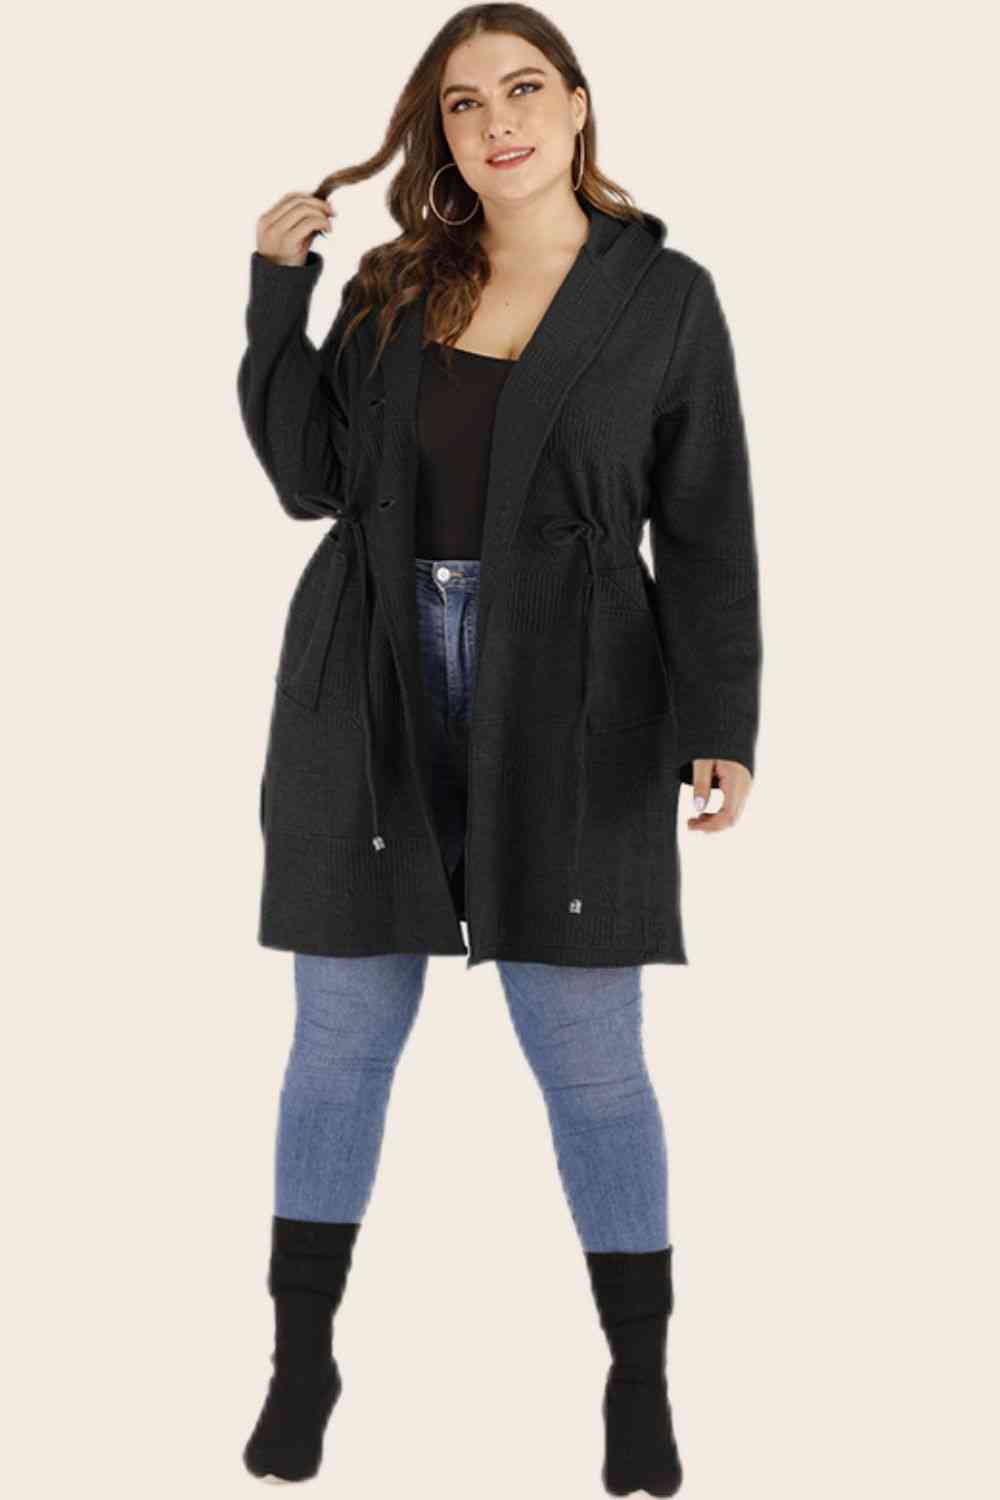 Plus Size Drawstring Waist Hooded Cardigan with Pockets - Bellisima Clothing Collective